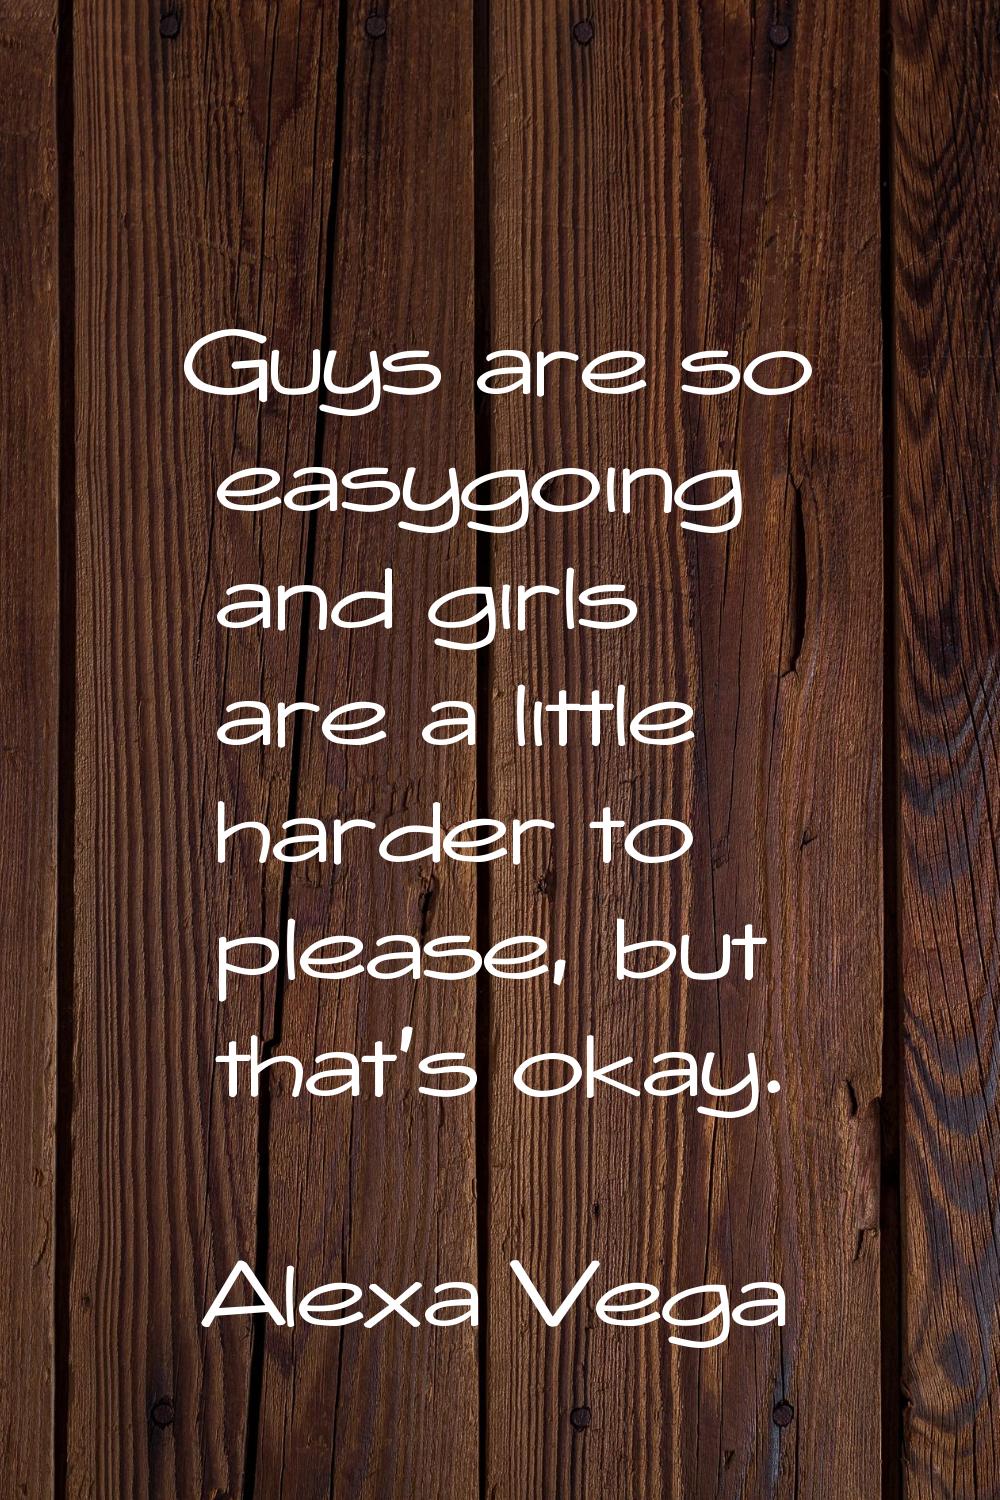 Guys are so easygoing and girls are a little harder to please, but that's okay.